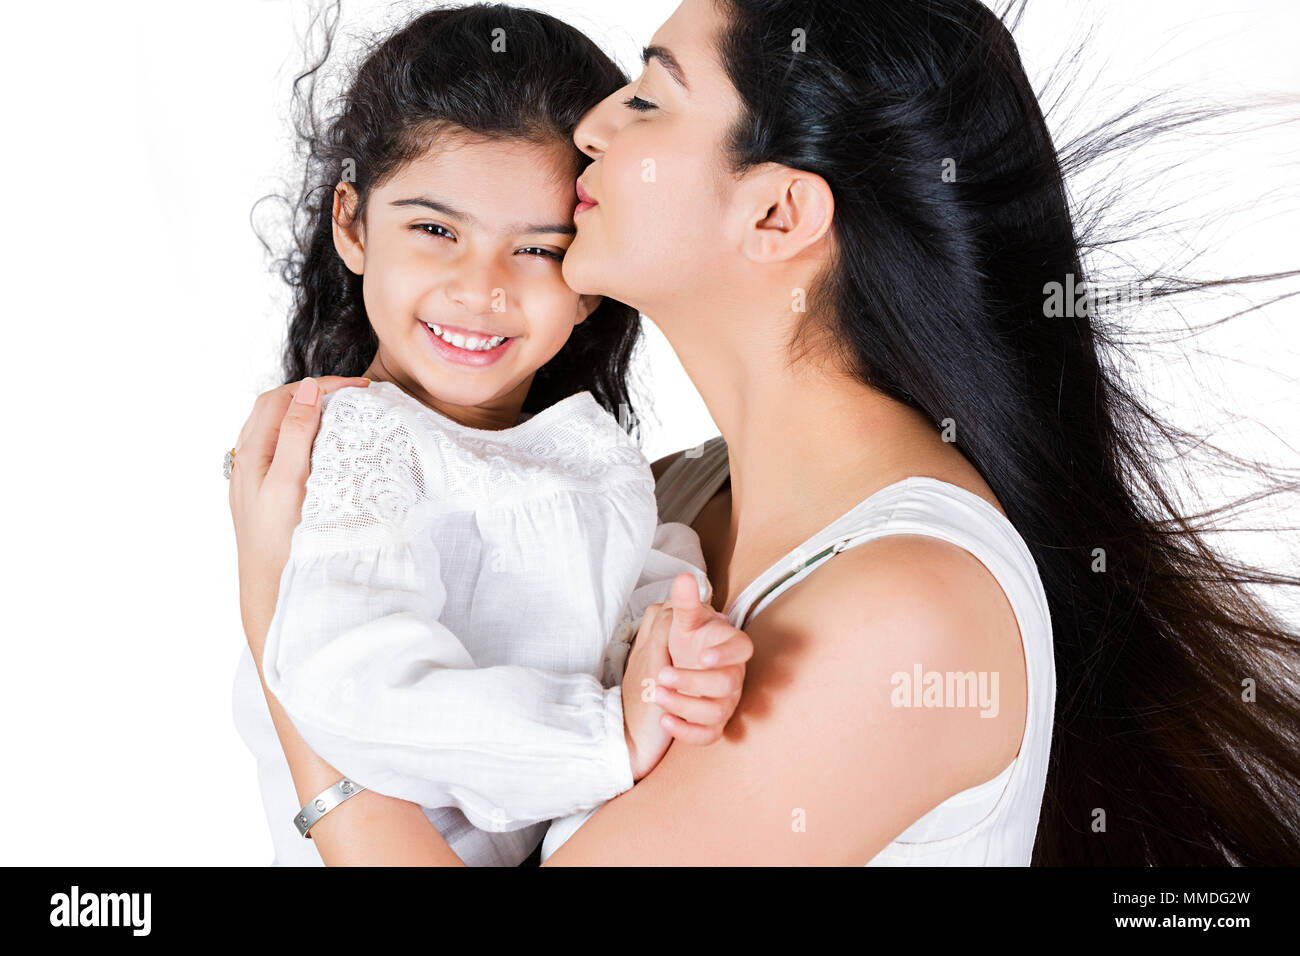 Happy Mother Giving A Kiss To Her Little Daughter Fun Cheerful Stock Photo